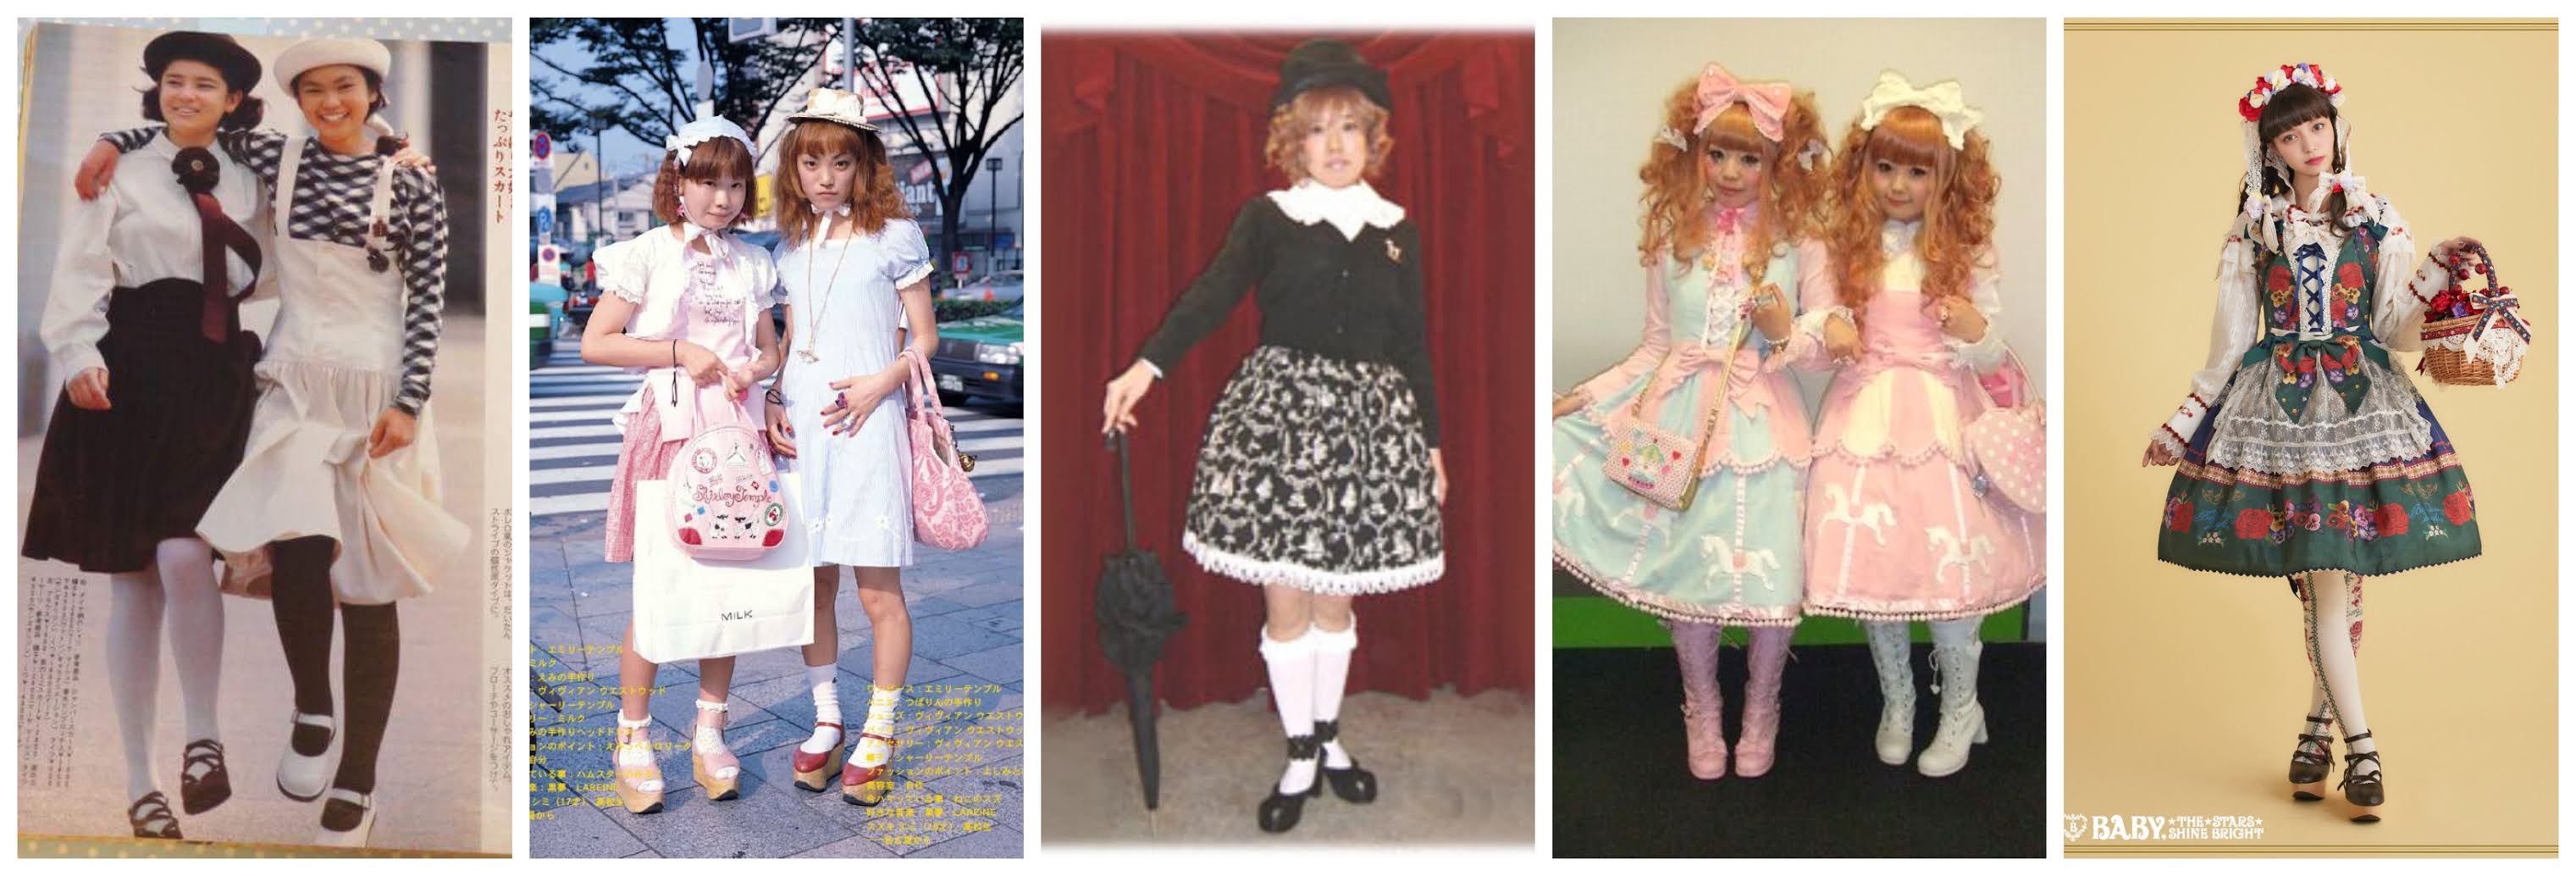 Philippine Gothic and Lolita Community - Back to Basics: What is Lolita  fashion? It is a fashion subculture originating in Japan that takes  inspiration from the fashion of the Victorian, Roccoco or